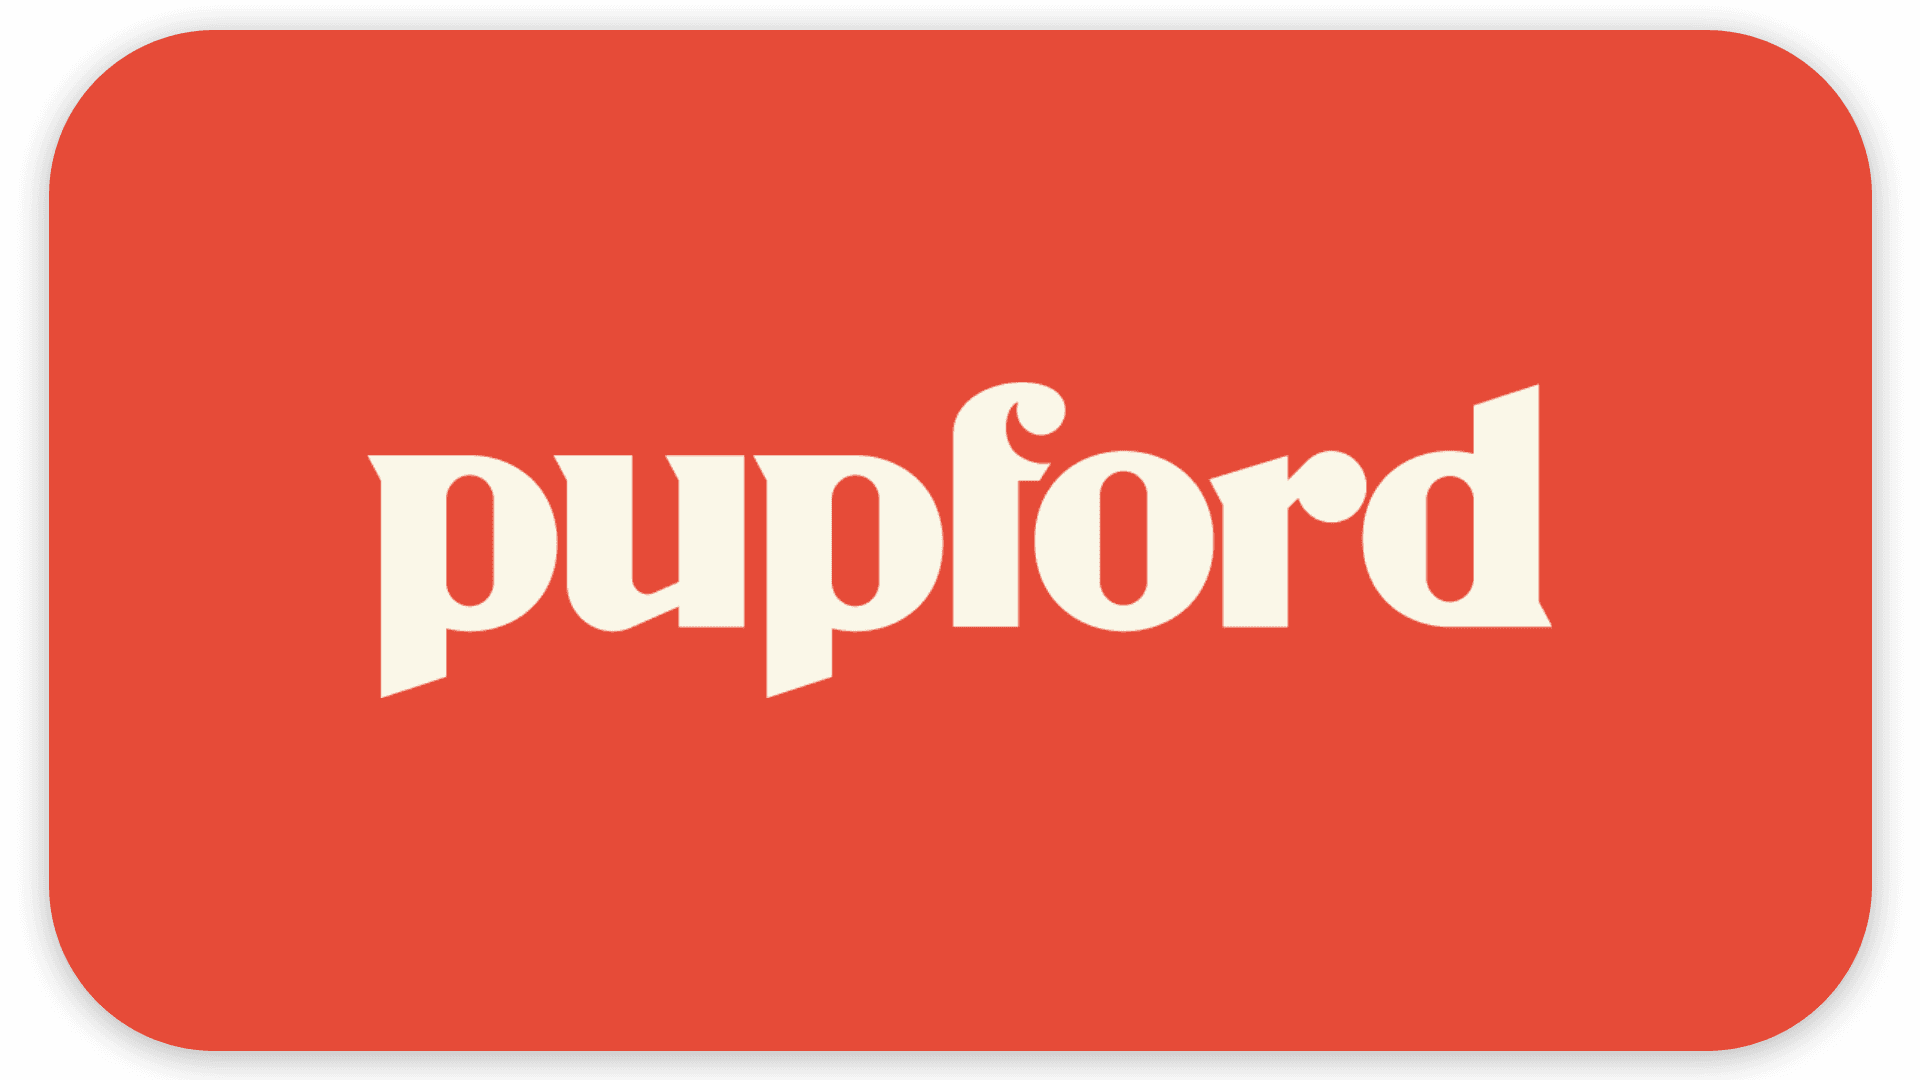 A red logo with "pupford" in white bold font.